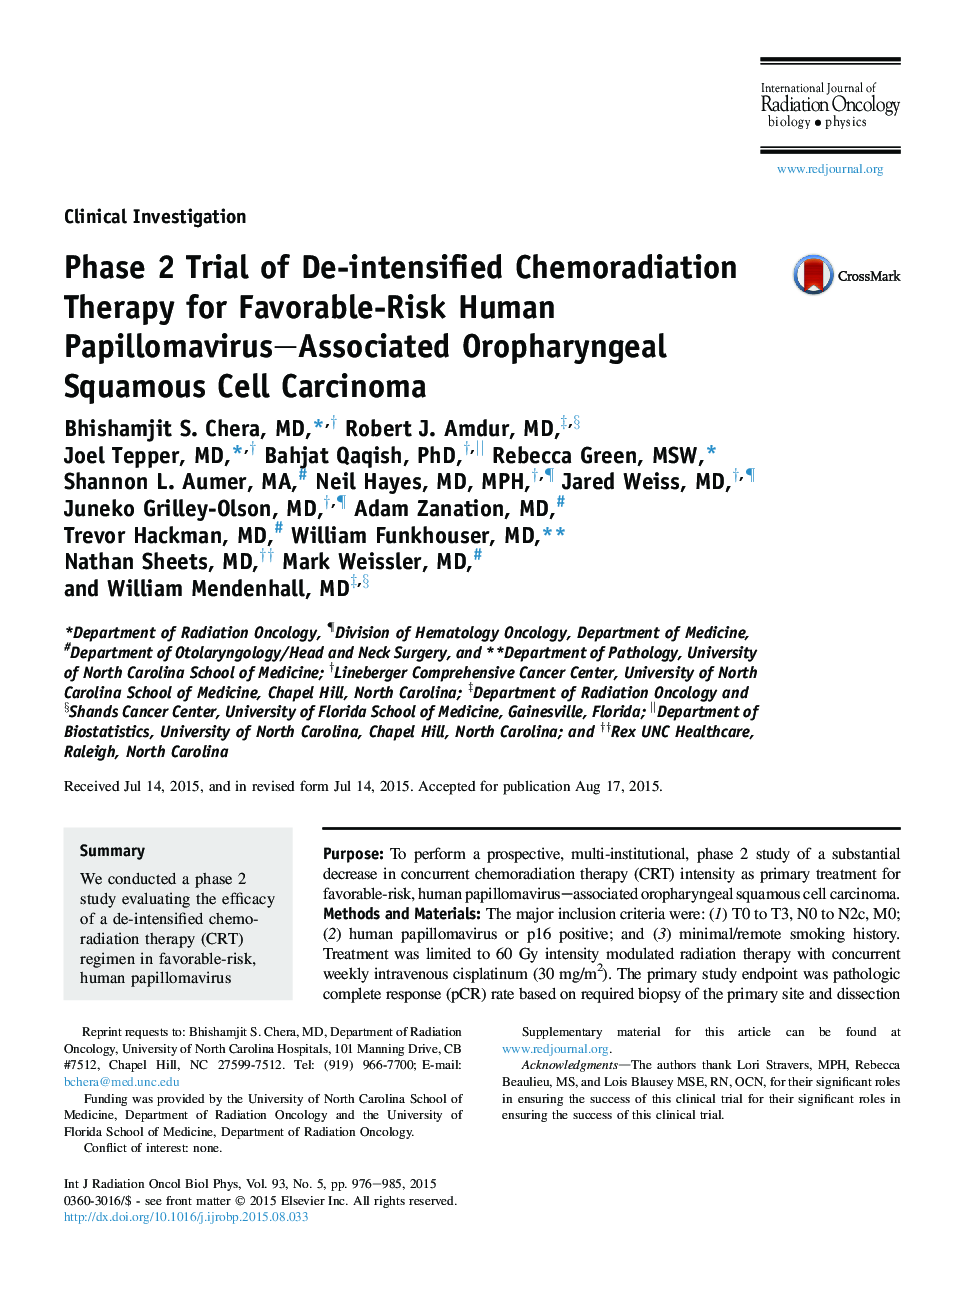 Phase 2 Trial of De-intensified Chemoradiation Therapy for Favorable-Risk Human Papillomavirus-Associated Oropharyngeal Squamous Cell Carcinoma